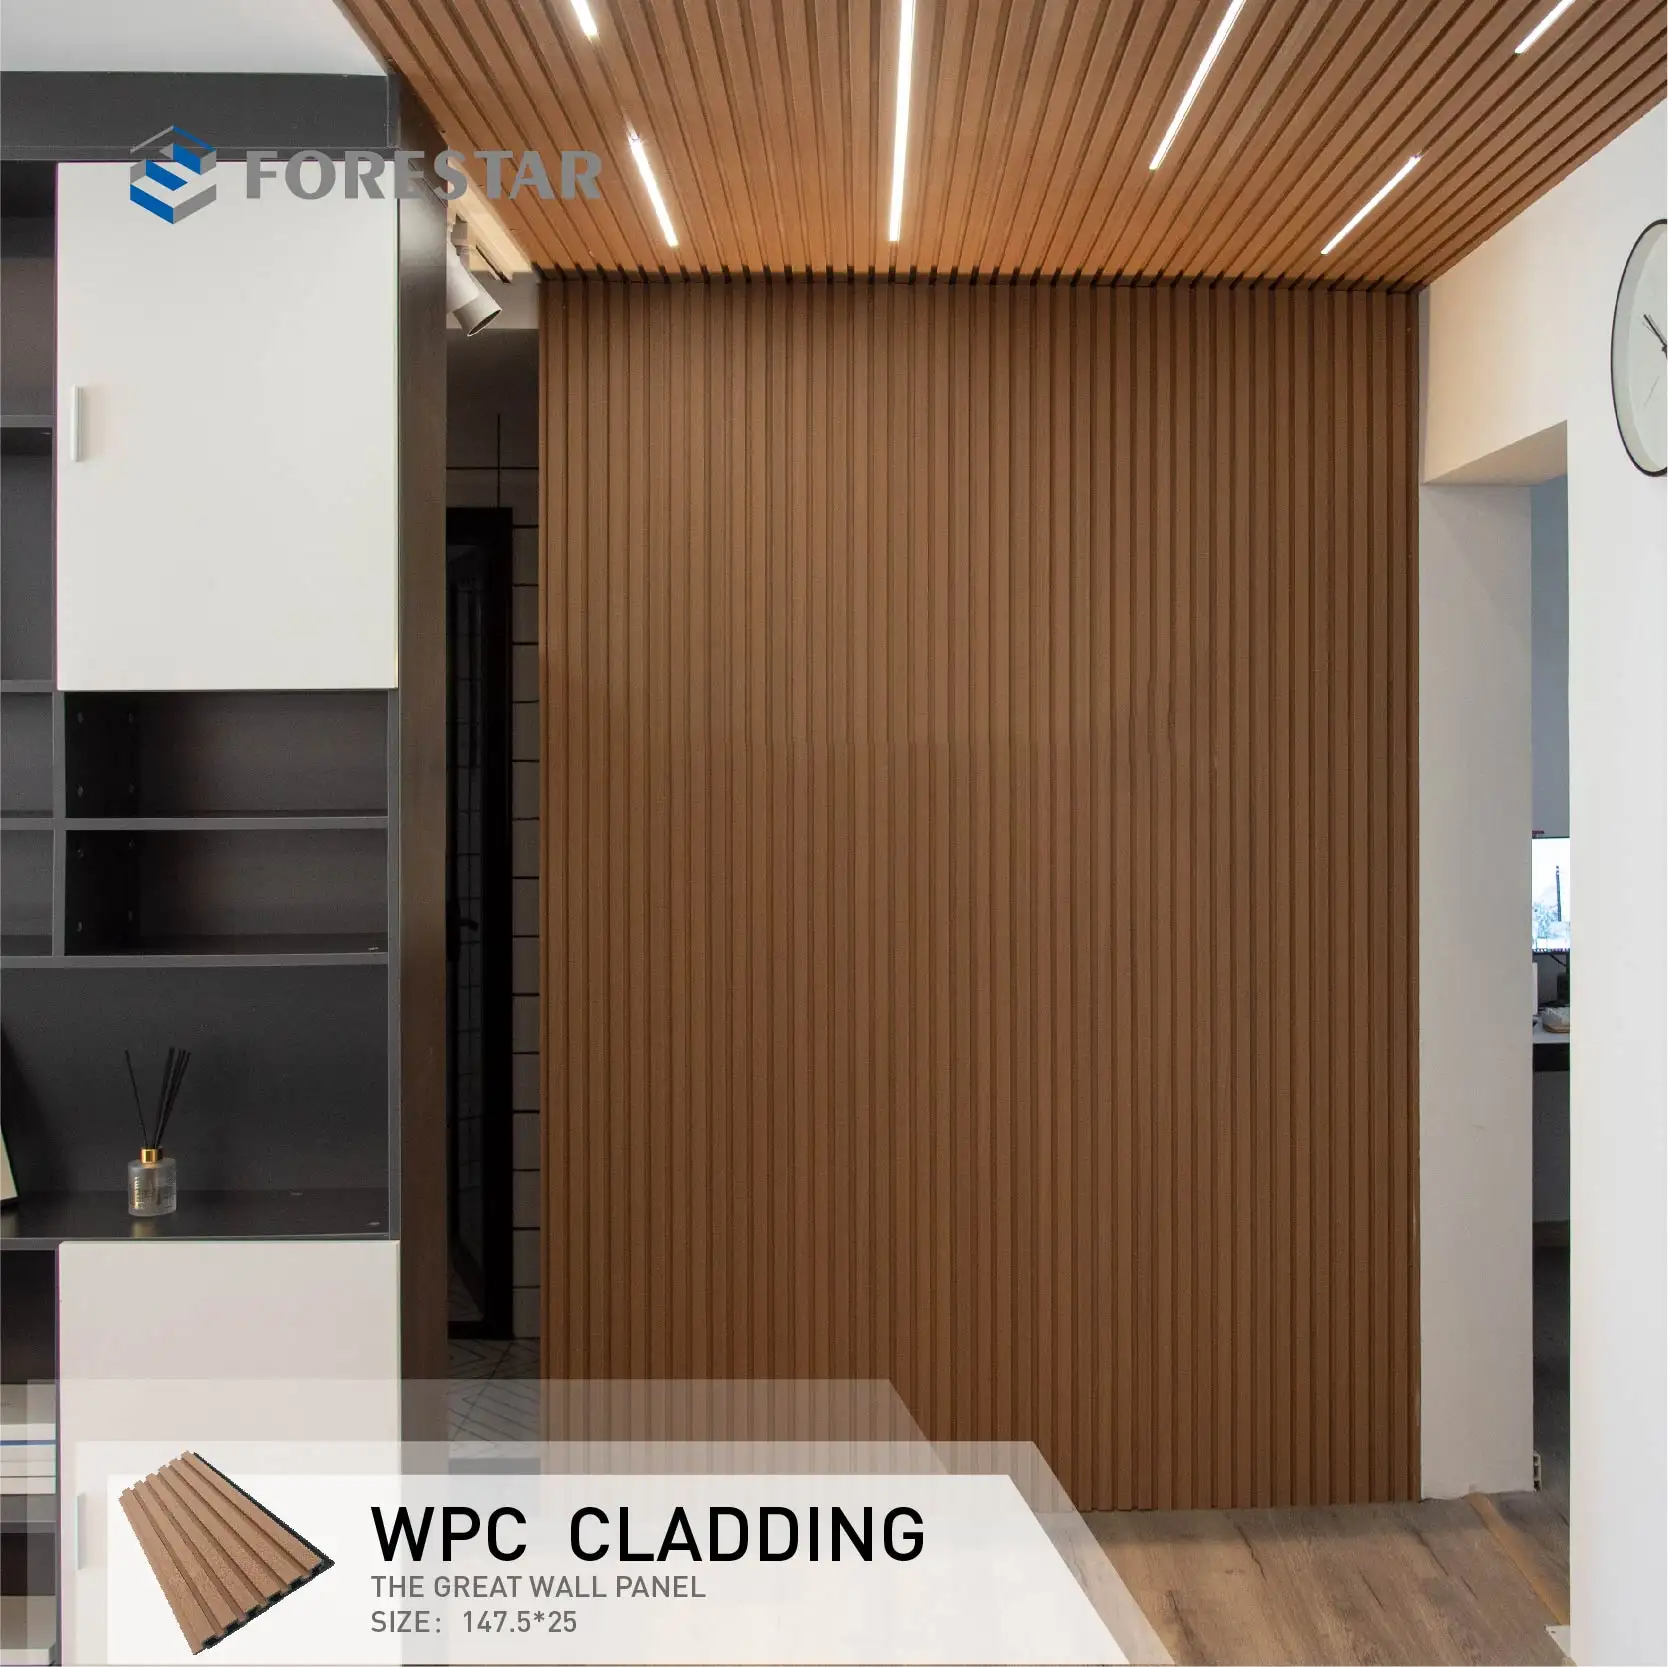 Hot Sale Wooden Plastic Composite Co-Extrusion wall panel OEM services provided WPC wall panel outdoor cladding